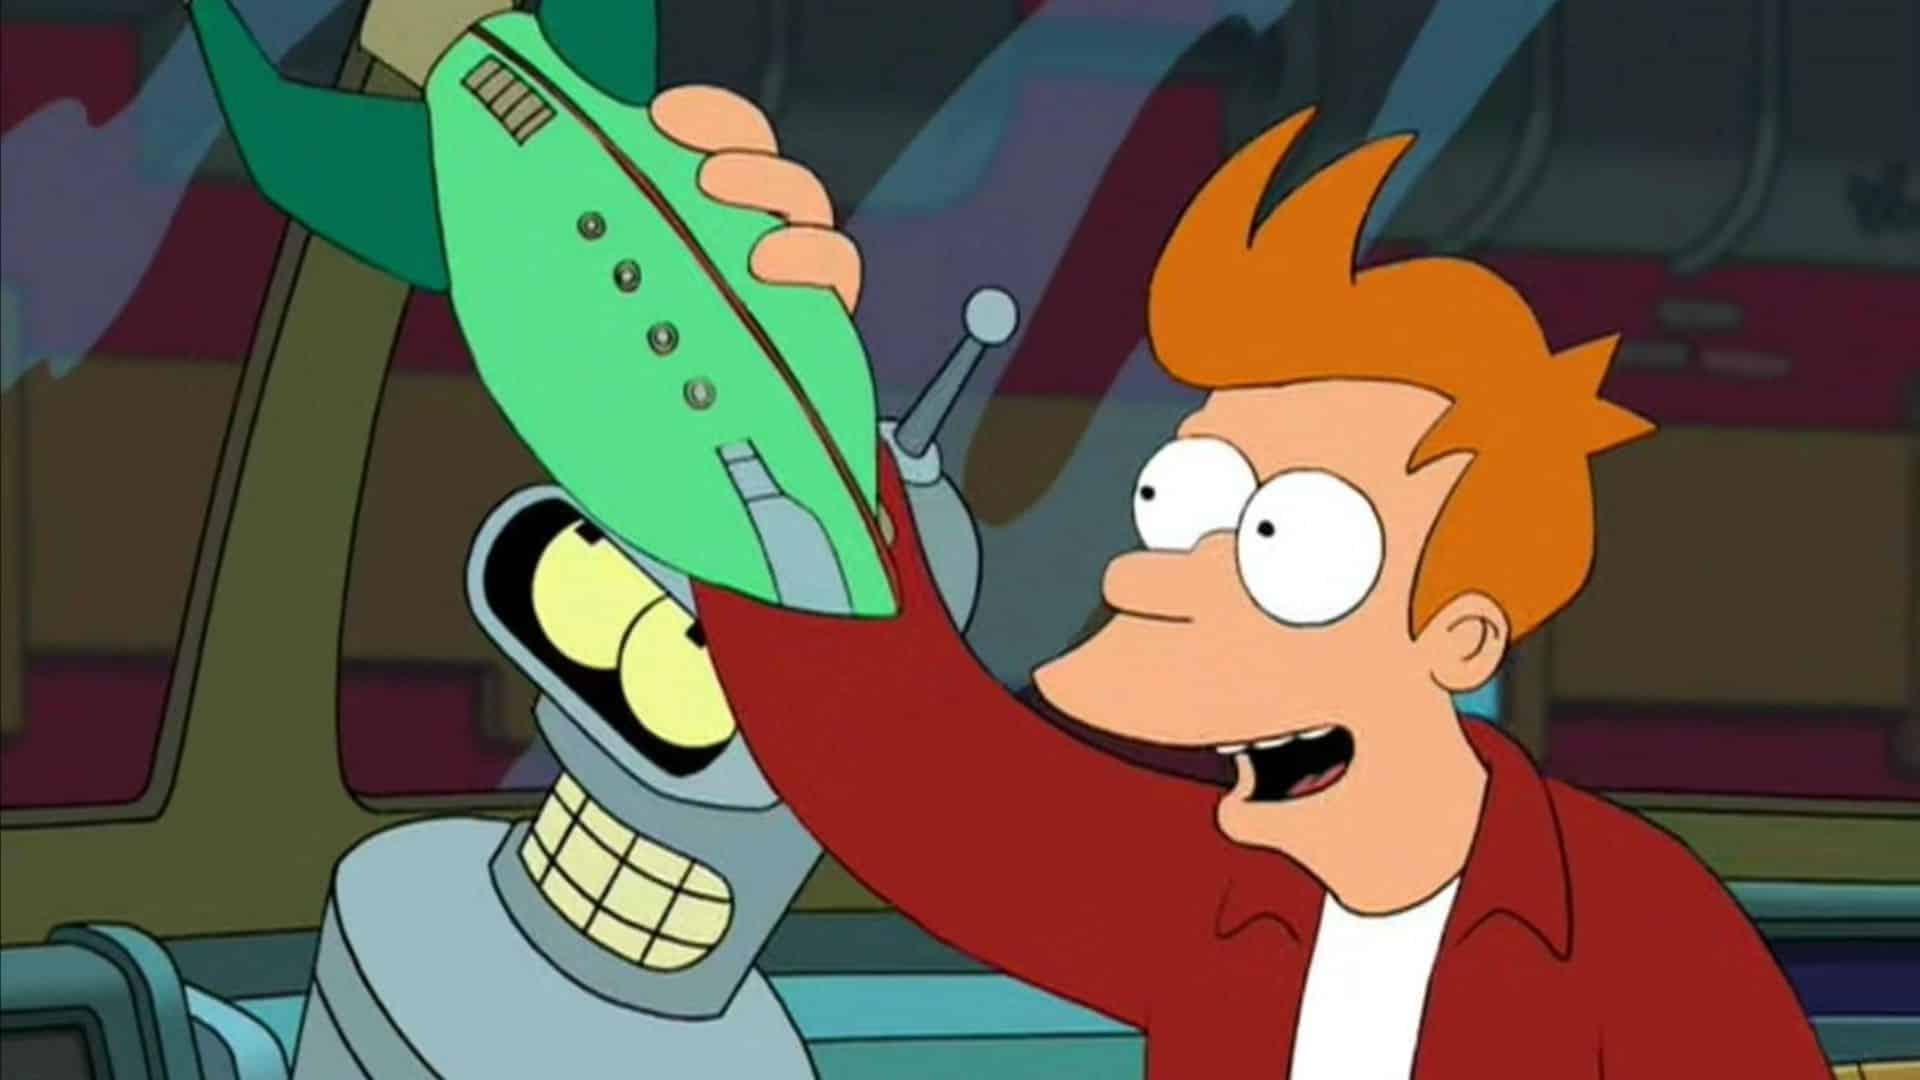 Bender and Fry play with a model ship in this image from 20th Century Fox Television